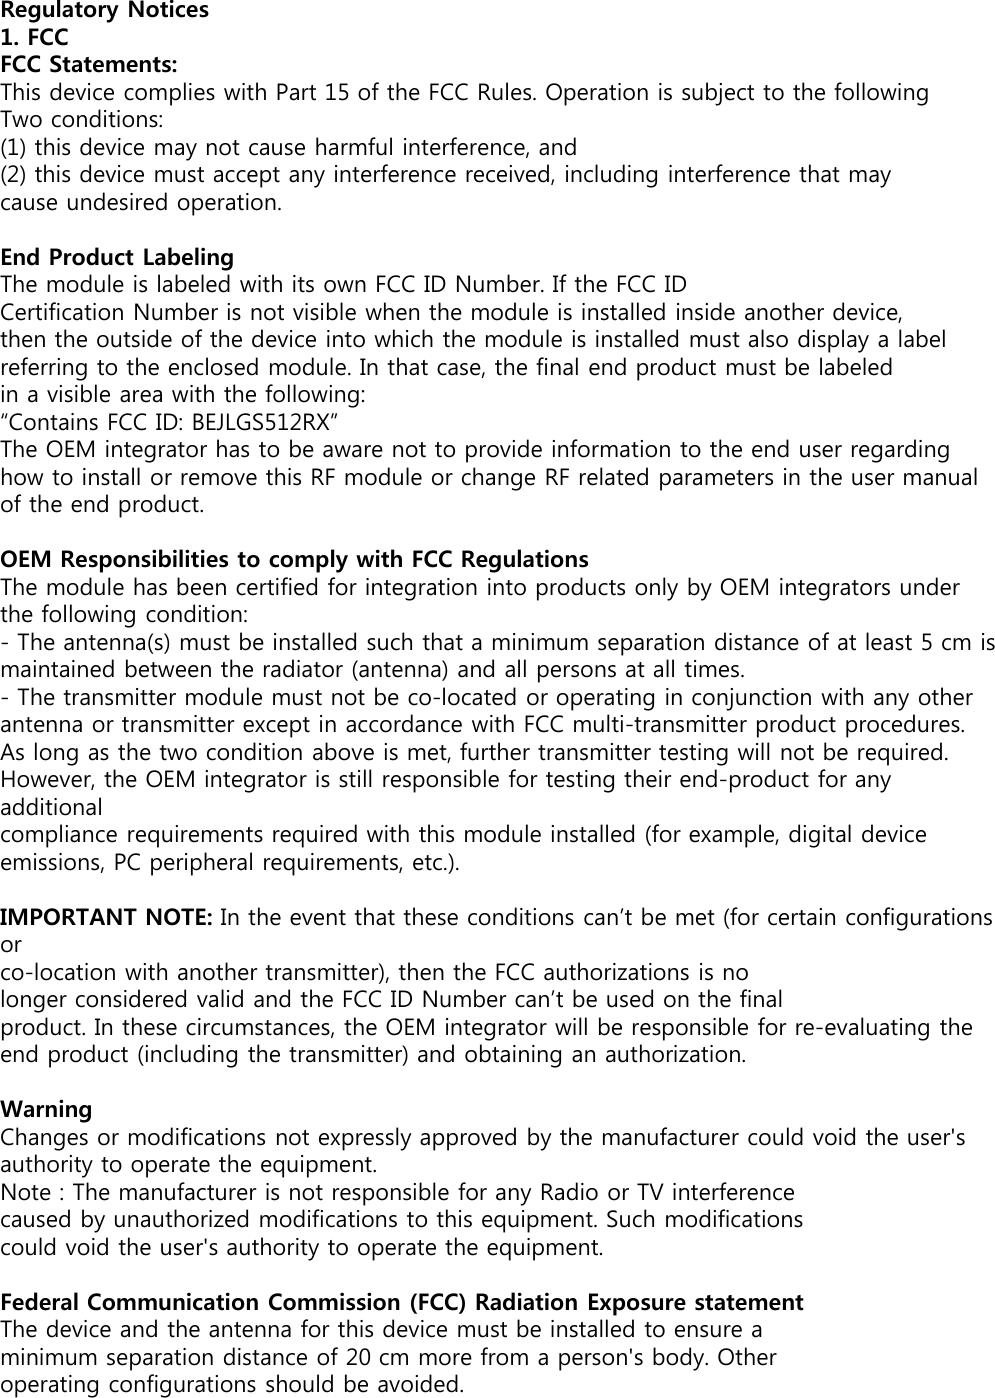 Regulatory Notices1. FCCFCC Statements:This device complies with Part 15 of the FCC Rules. Operation is subject to the following Two conditions:(1) this device may not cause harmful interference, and(2) this device must accept any interference received, including interference that maycause undesired operation.End Product LabelingThe module is labeled with its own FCC ID Number. If the FCC IDCertification Number is not visible when the module is installed inside another device, then the outside of the device into which the module is installed must also display a label referring to the enclosed module. In that case, the final end product must be labeled in a visible area with the following:“Contains FCC ID: BEJLGS512RX”The OEM integrator has to be aware not to provide information to the end user regarding how to install or remove this RF module or change RF related parameters in the user manual of the end product.OEM Responsibilities to comply with FCC RegulationsThe module has been certified for integration into products only by OEM integrators under the following condition:- The antenna(s) must be installed such that a minimum separation distance of at least 5 cm ismaintained between the radiator (antenna) and all persons at all times.- The transmitter module must not be co-located or operating in conjunction with any otherantenna or transmitter except in accordance with FCC multi-transmitter product procedures.As long as the two condition above is met, further transmitter testing will not be required.However, the OEM integrator is still responsible for testing their end-product for any additionalcompliance requirements required with this module installed (for example, digital deviceemissions, PC peripheral requirements, etc.).IMPORTANT NOTE: In the event that these conditions can’t be met (for certain configurations orco-location with another transmitter), then the FCC authorizations is nolonger considered valid and the FCC ID Number can’t be used on the finalproduct. In these circumstances, the OEM integrator will be responsible for re-evaluating the end product (including the transmitter) and obtaining an authorization.WarningChanges or modifications not expressly approved by the manufacturer could void the user&apos;s authority to operate the equipment.Note : The manufacturer is not responsible for any Radio or TV interferencecaused by unauthorized modifications to this equipment. Such modificationscould void the user&apos;s authority to operate the equipment.Federal Communication Commission (FCC) Radiation Exposure statementThe device and the antenna for this device must be installed to ensure aminimum separation distance of 20 cm more from a person&apos;s body. Otheroperating configurations should be avoided.